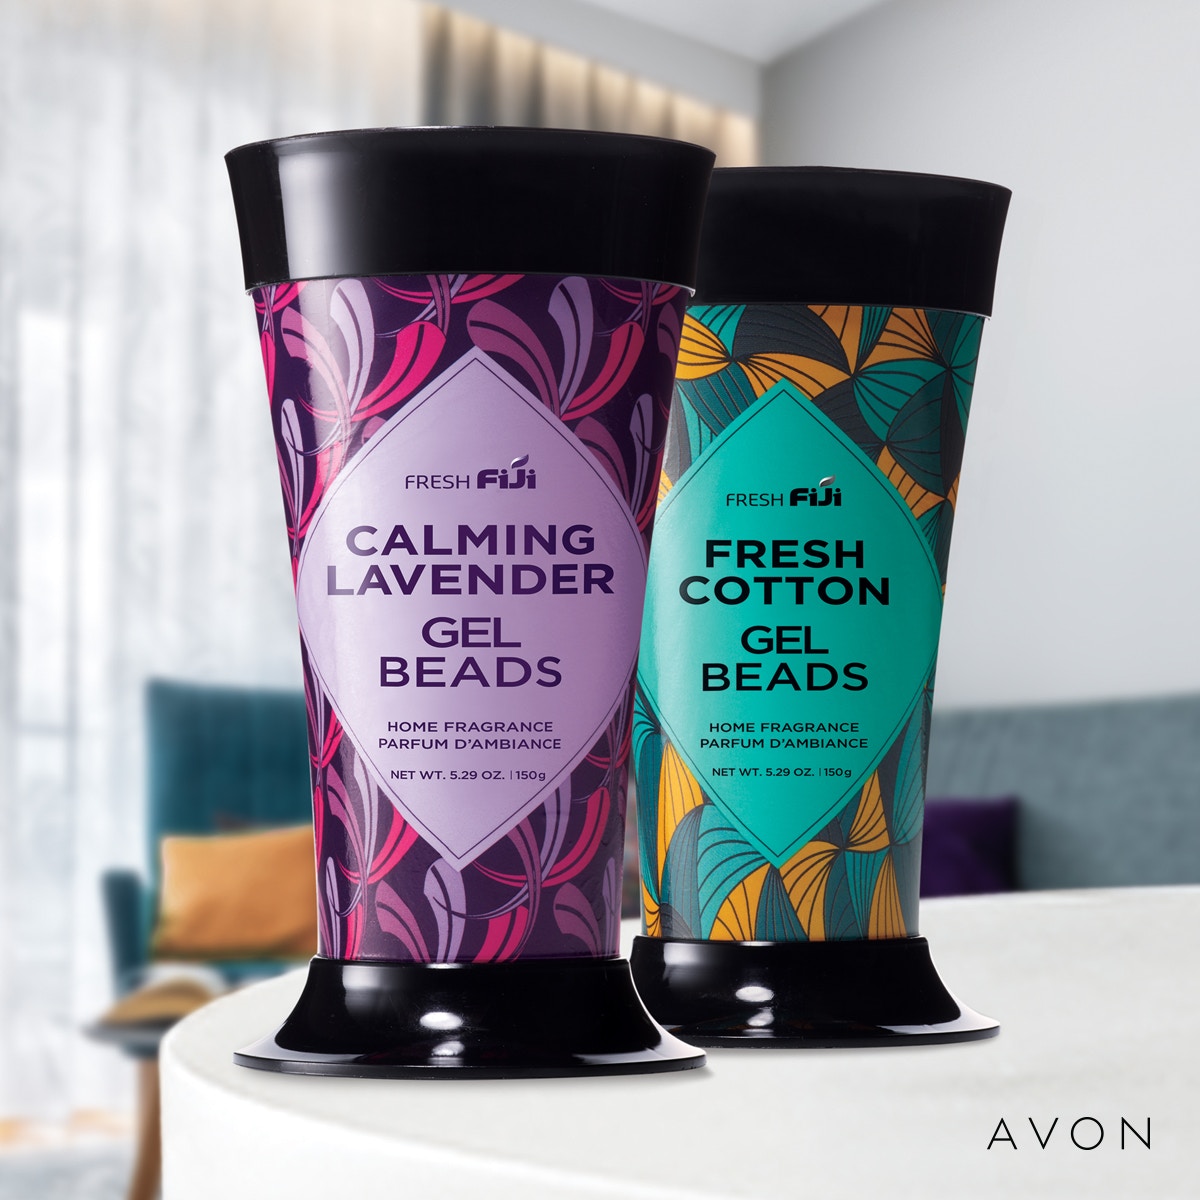 Fresh Fiji Gel Bead Diffuser. Freshen your home. Gel beads provide a slow release of fragrance. Infused with green tea extracts to remove and neutralize odors. #AvonEssentials #AvonRep #CalmingLavender #FreshCotton go.youravon.com/3njfpp